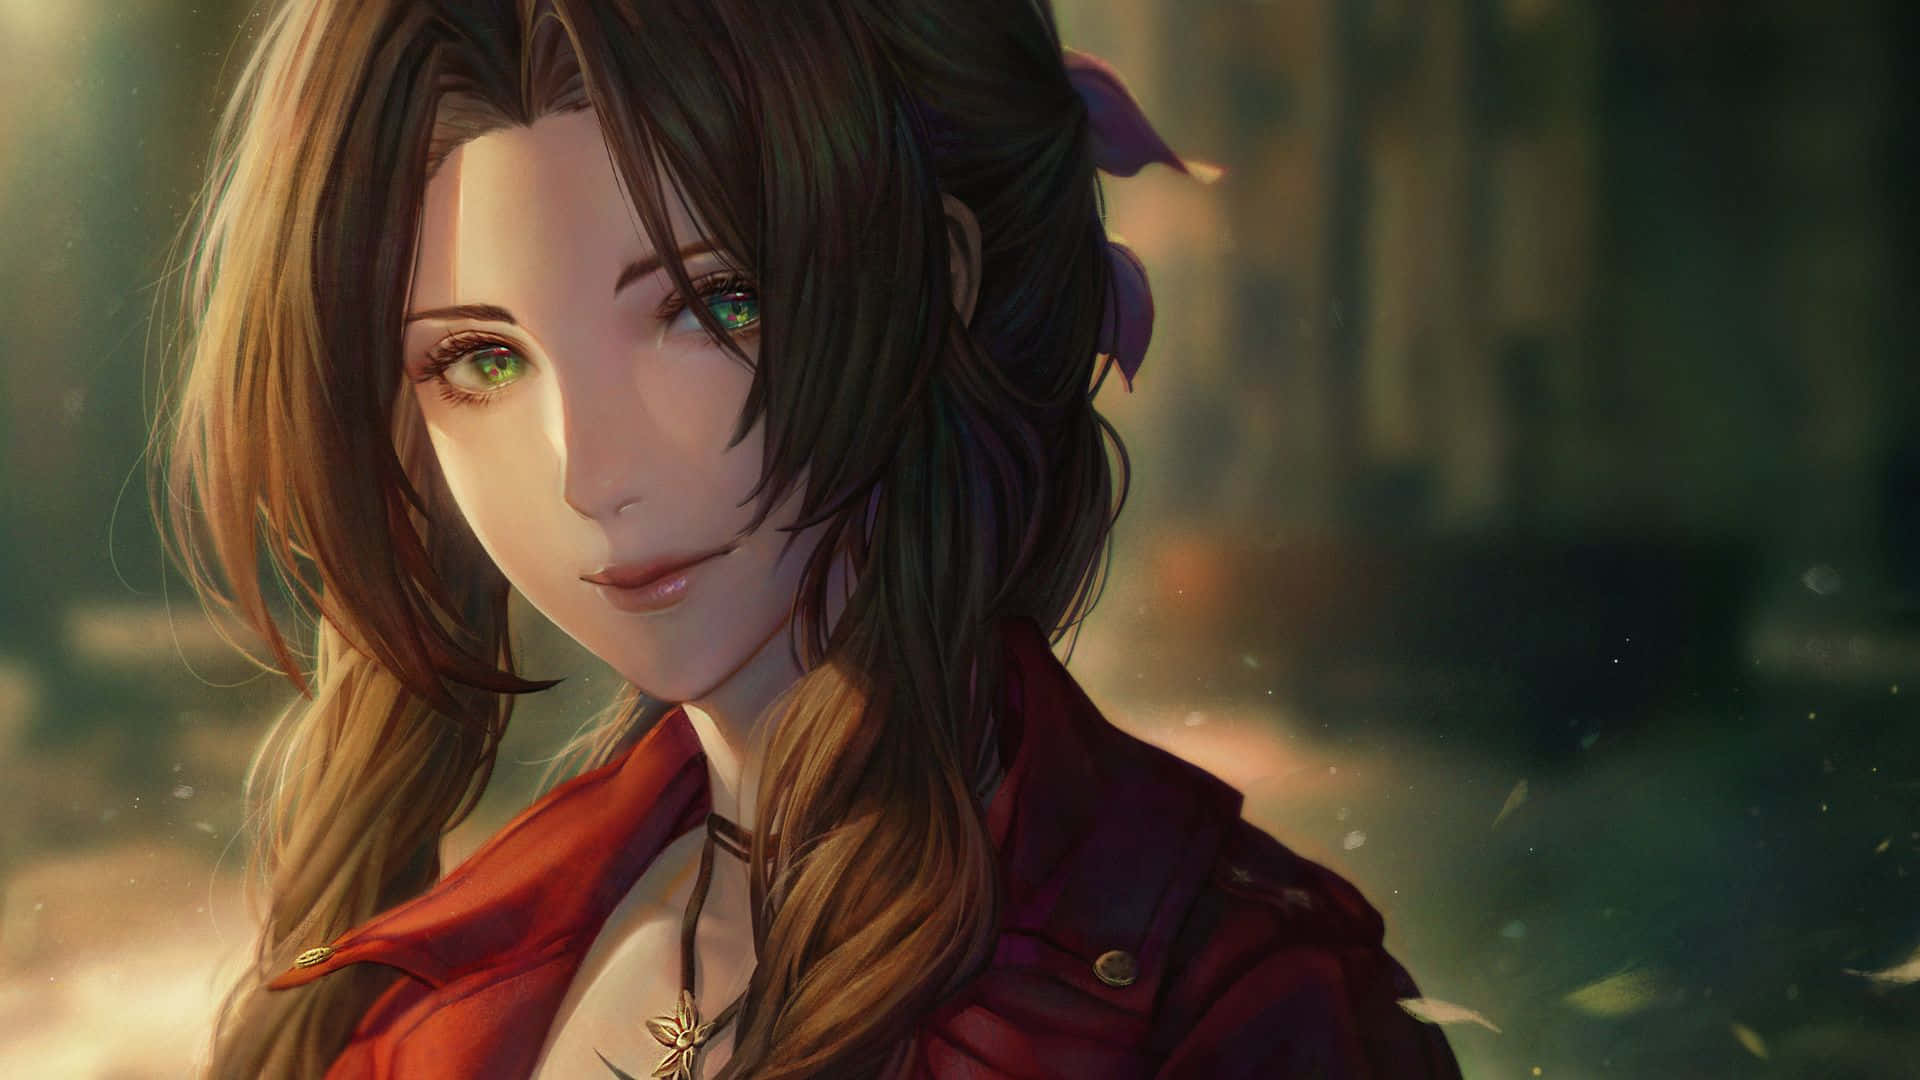 Aerith Gainsborough From Final Fantasy Vii Standing Amidst Lush Greenery Wallpaper